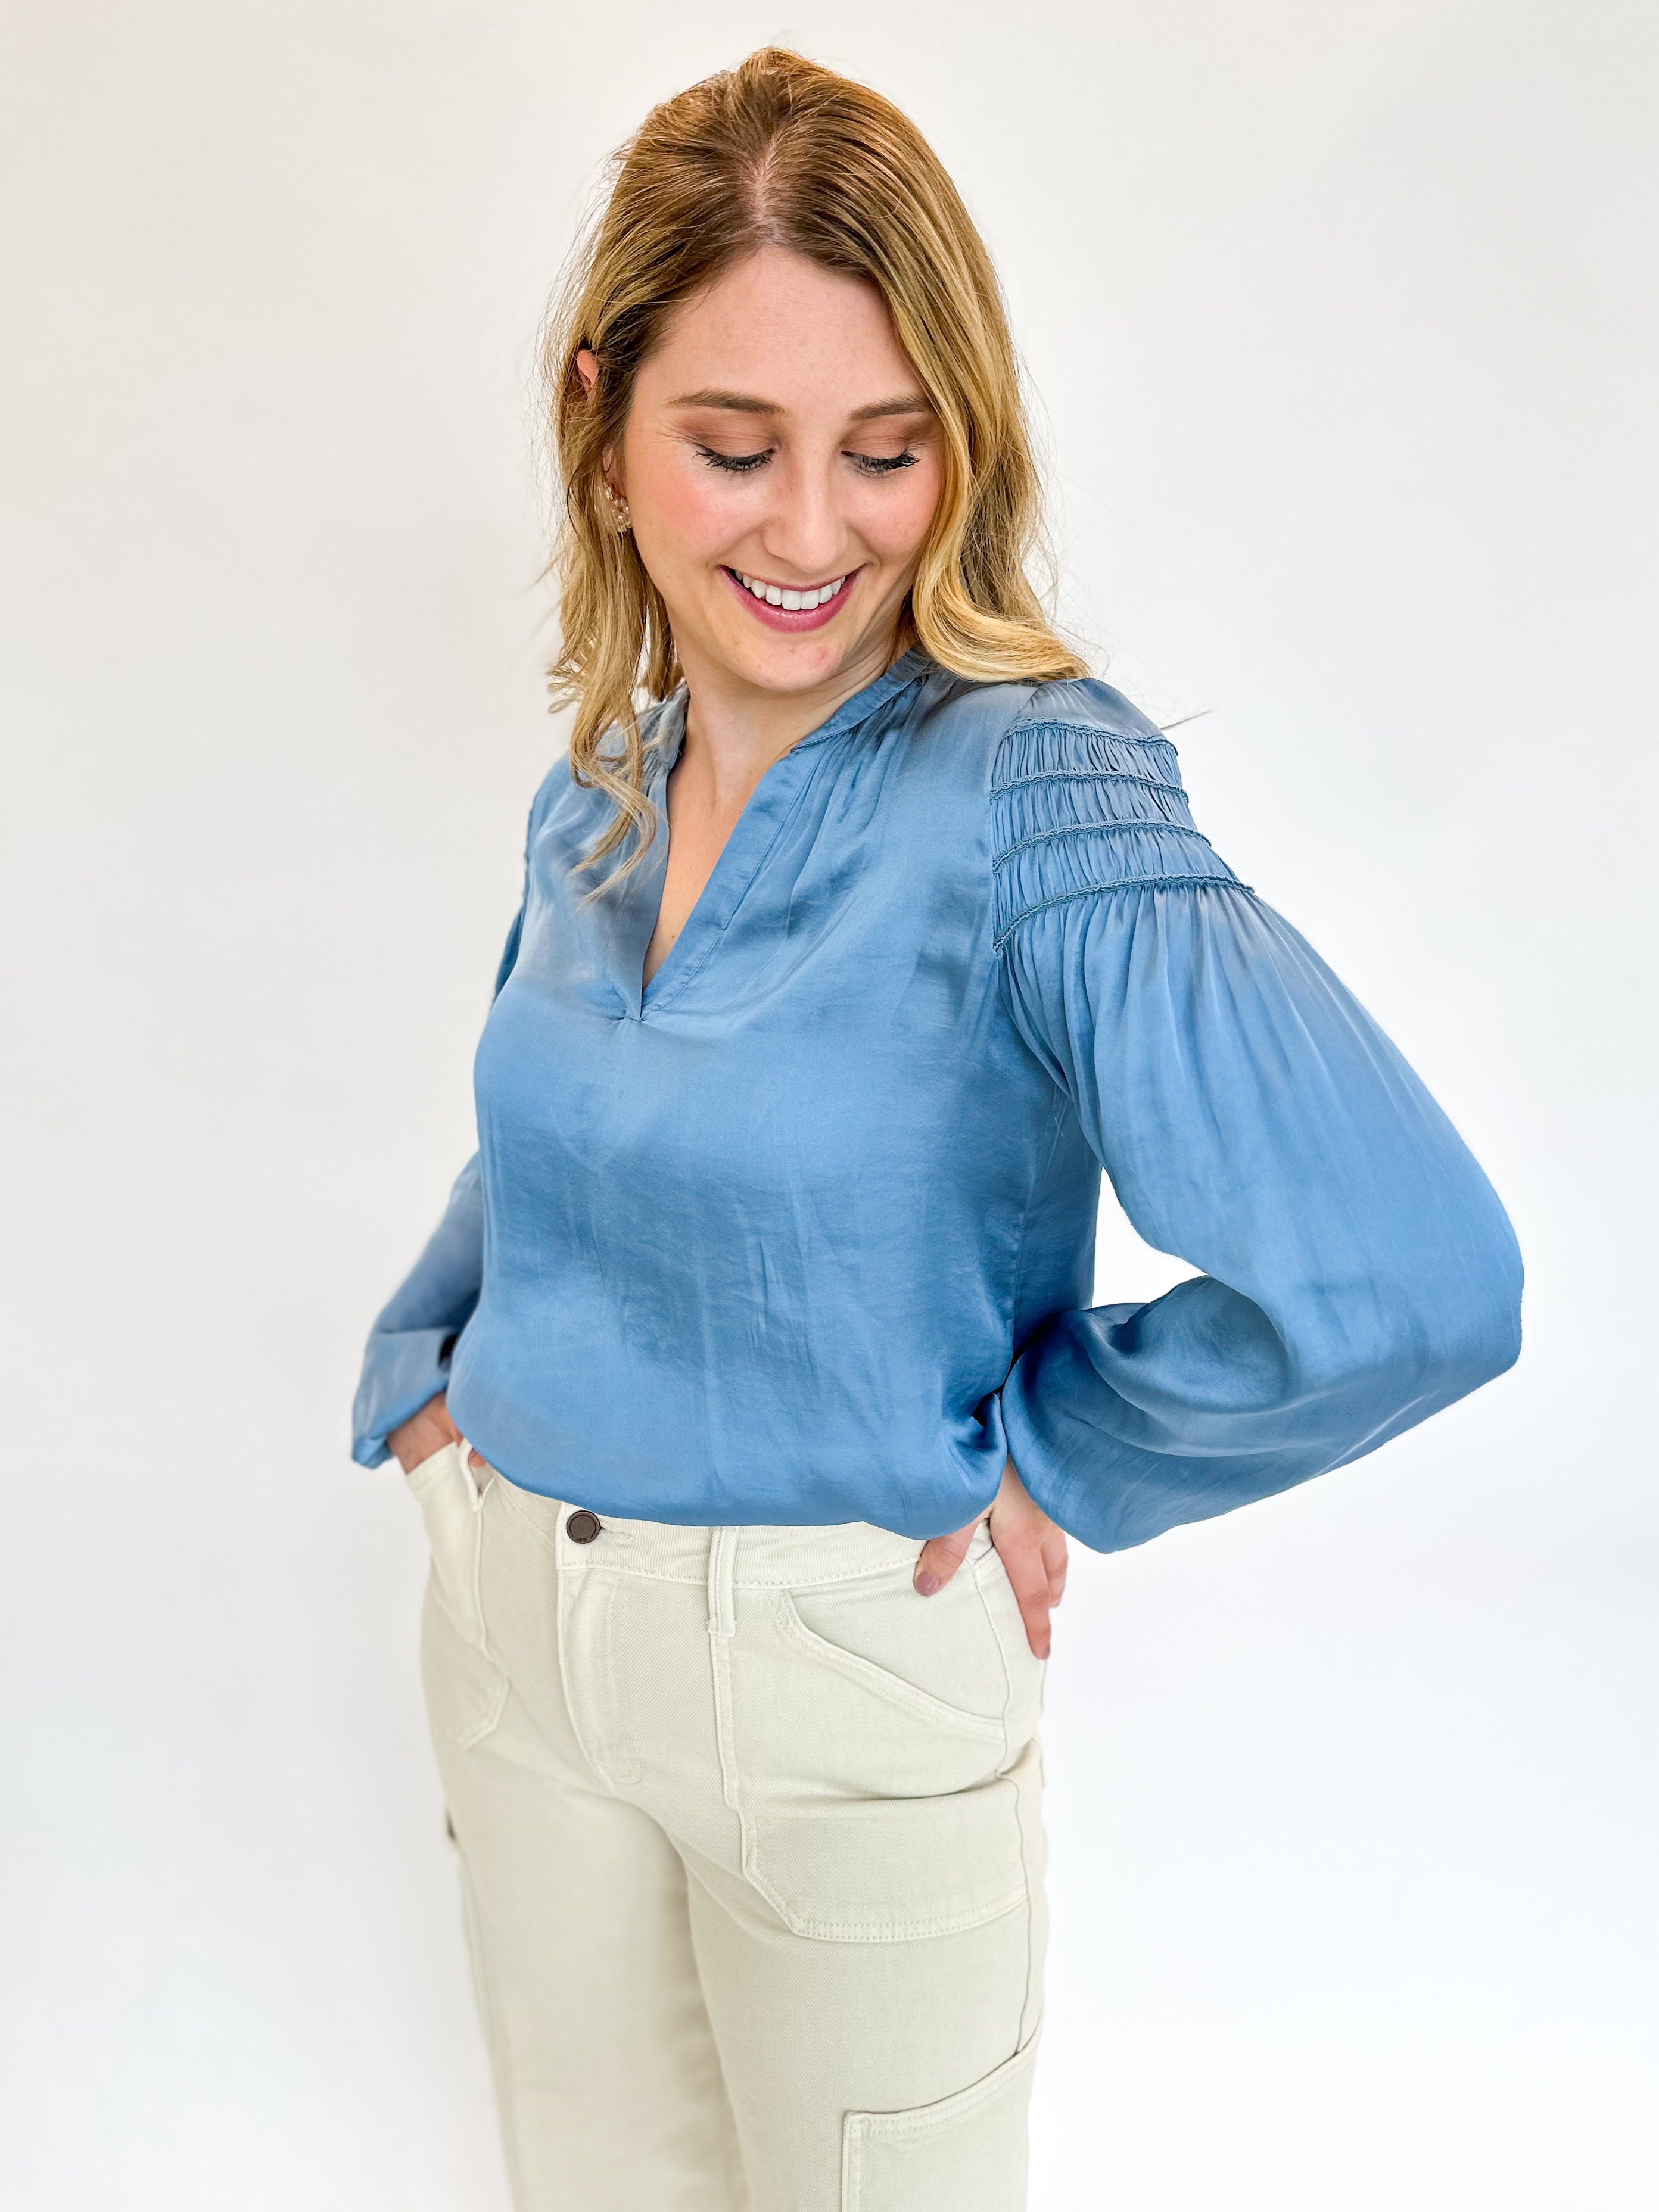 Dusty Sky Blouse-200 Fashion Blouses-CURRENT AIR CLOTHING-July & June Women's Fashion Boutique Located in San Antonio, Texas